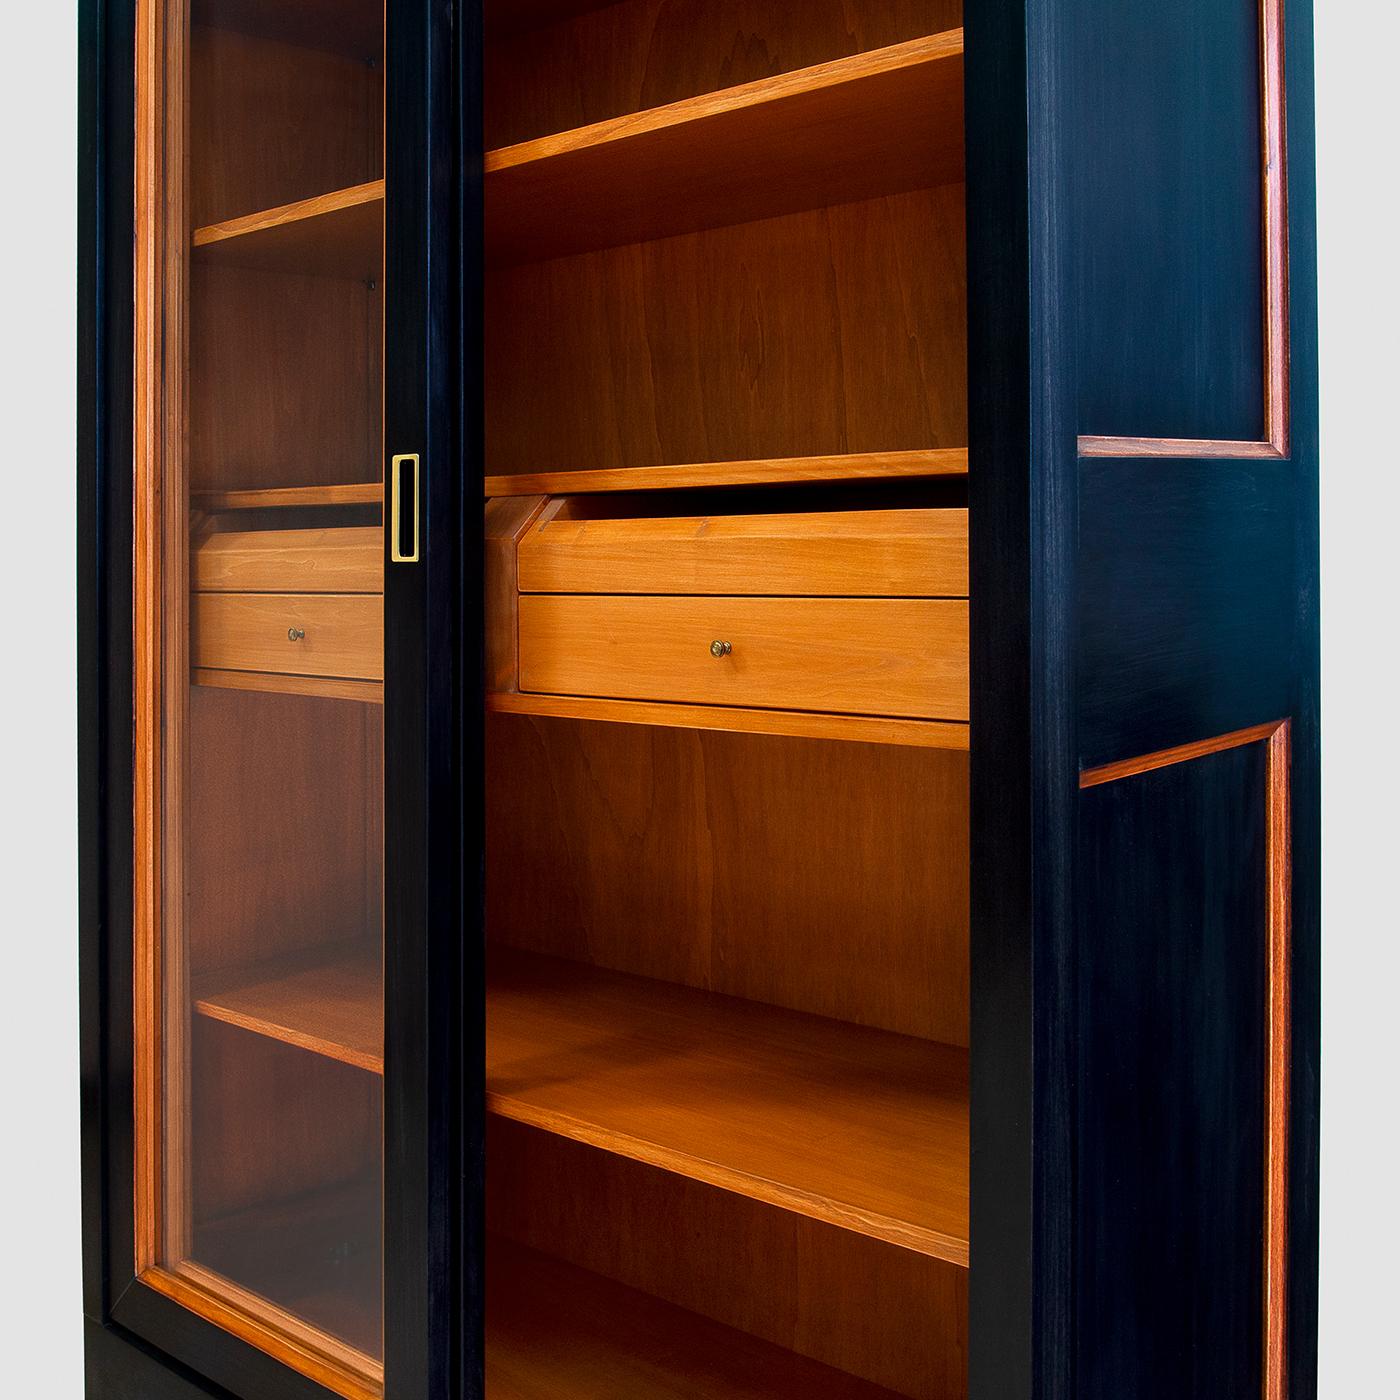 This luxe bookcase exemplifies Italian cabinetry tradition. The solid lime frame features two sliding glass doors and side glass panels that allow for an unobstructed view of some of the books and objects displayed on the three wooden shelves and